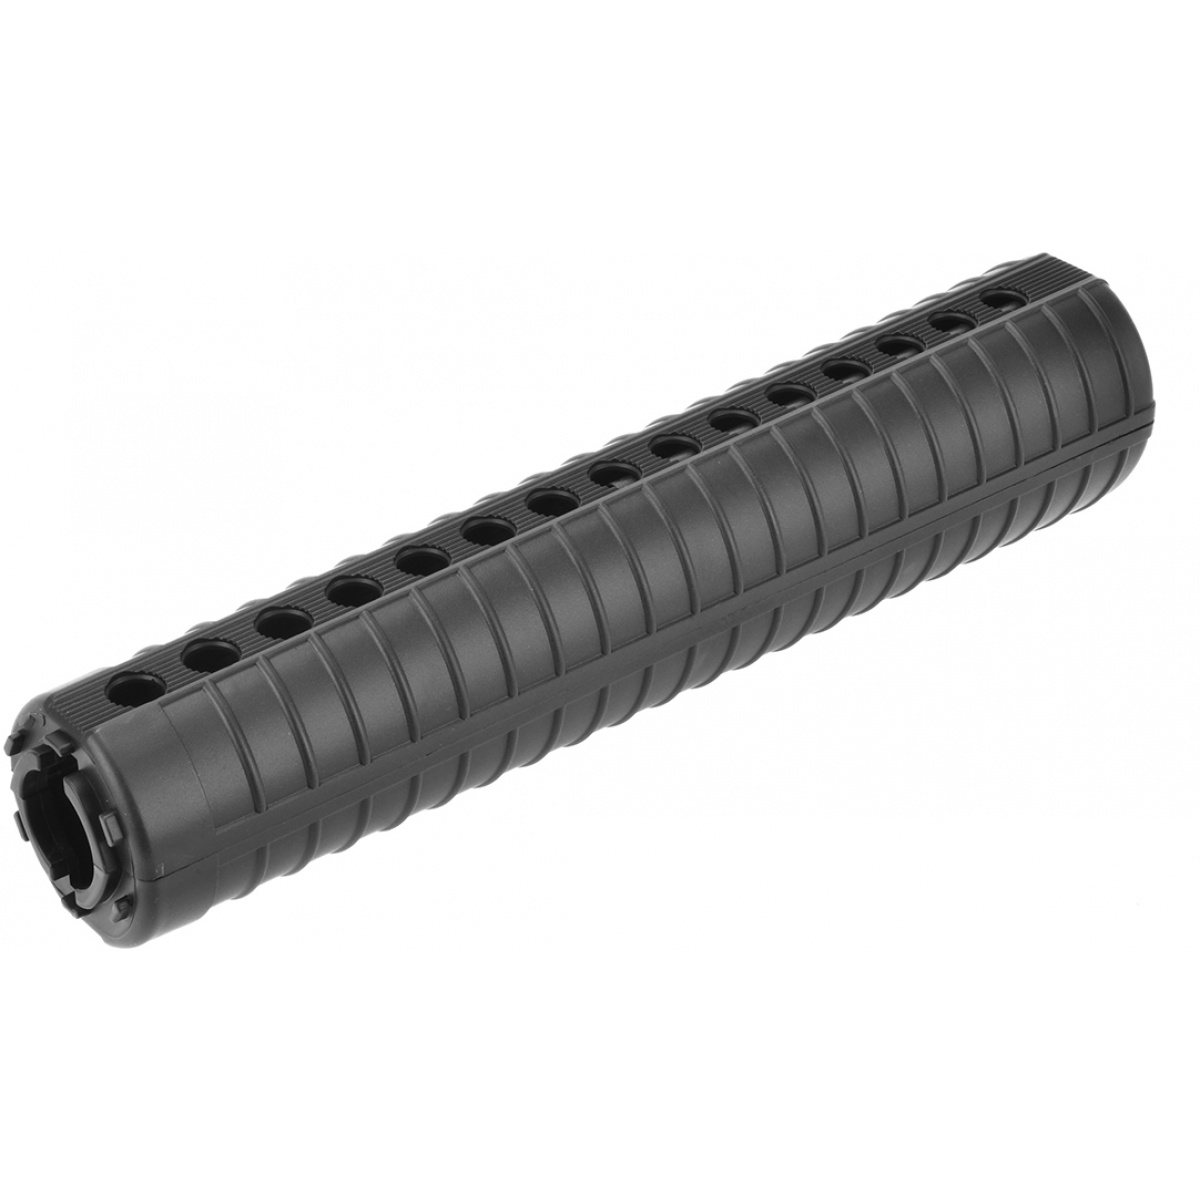 Golden Eagle M16A2 Polymer Handguard for M4/M16 Series AEGs - BLACK ...